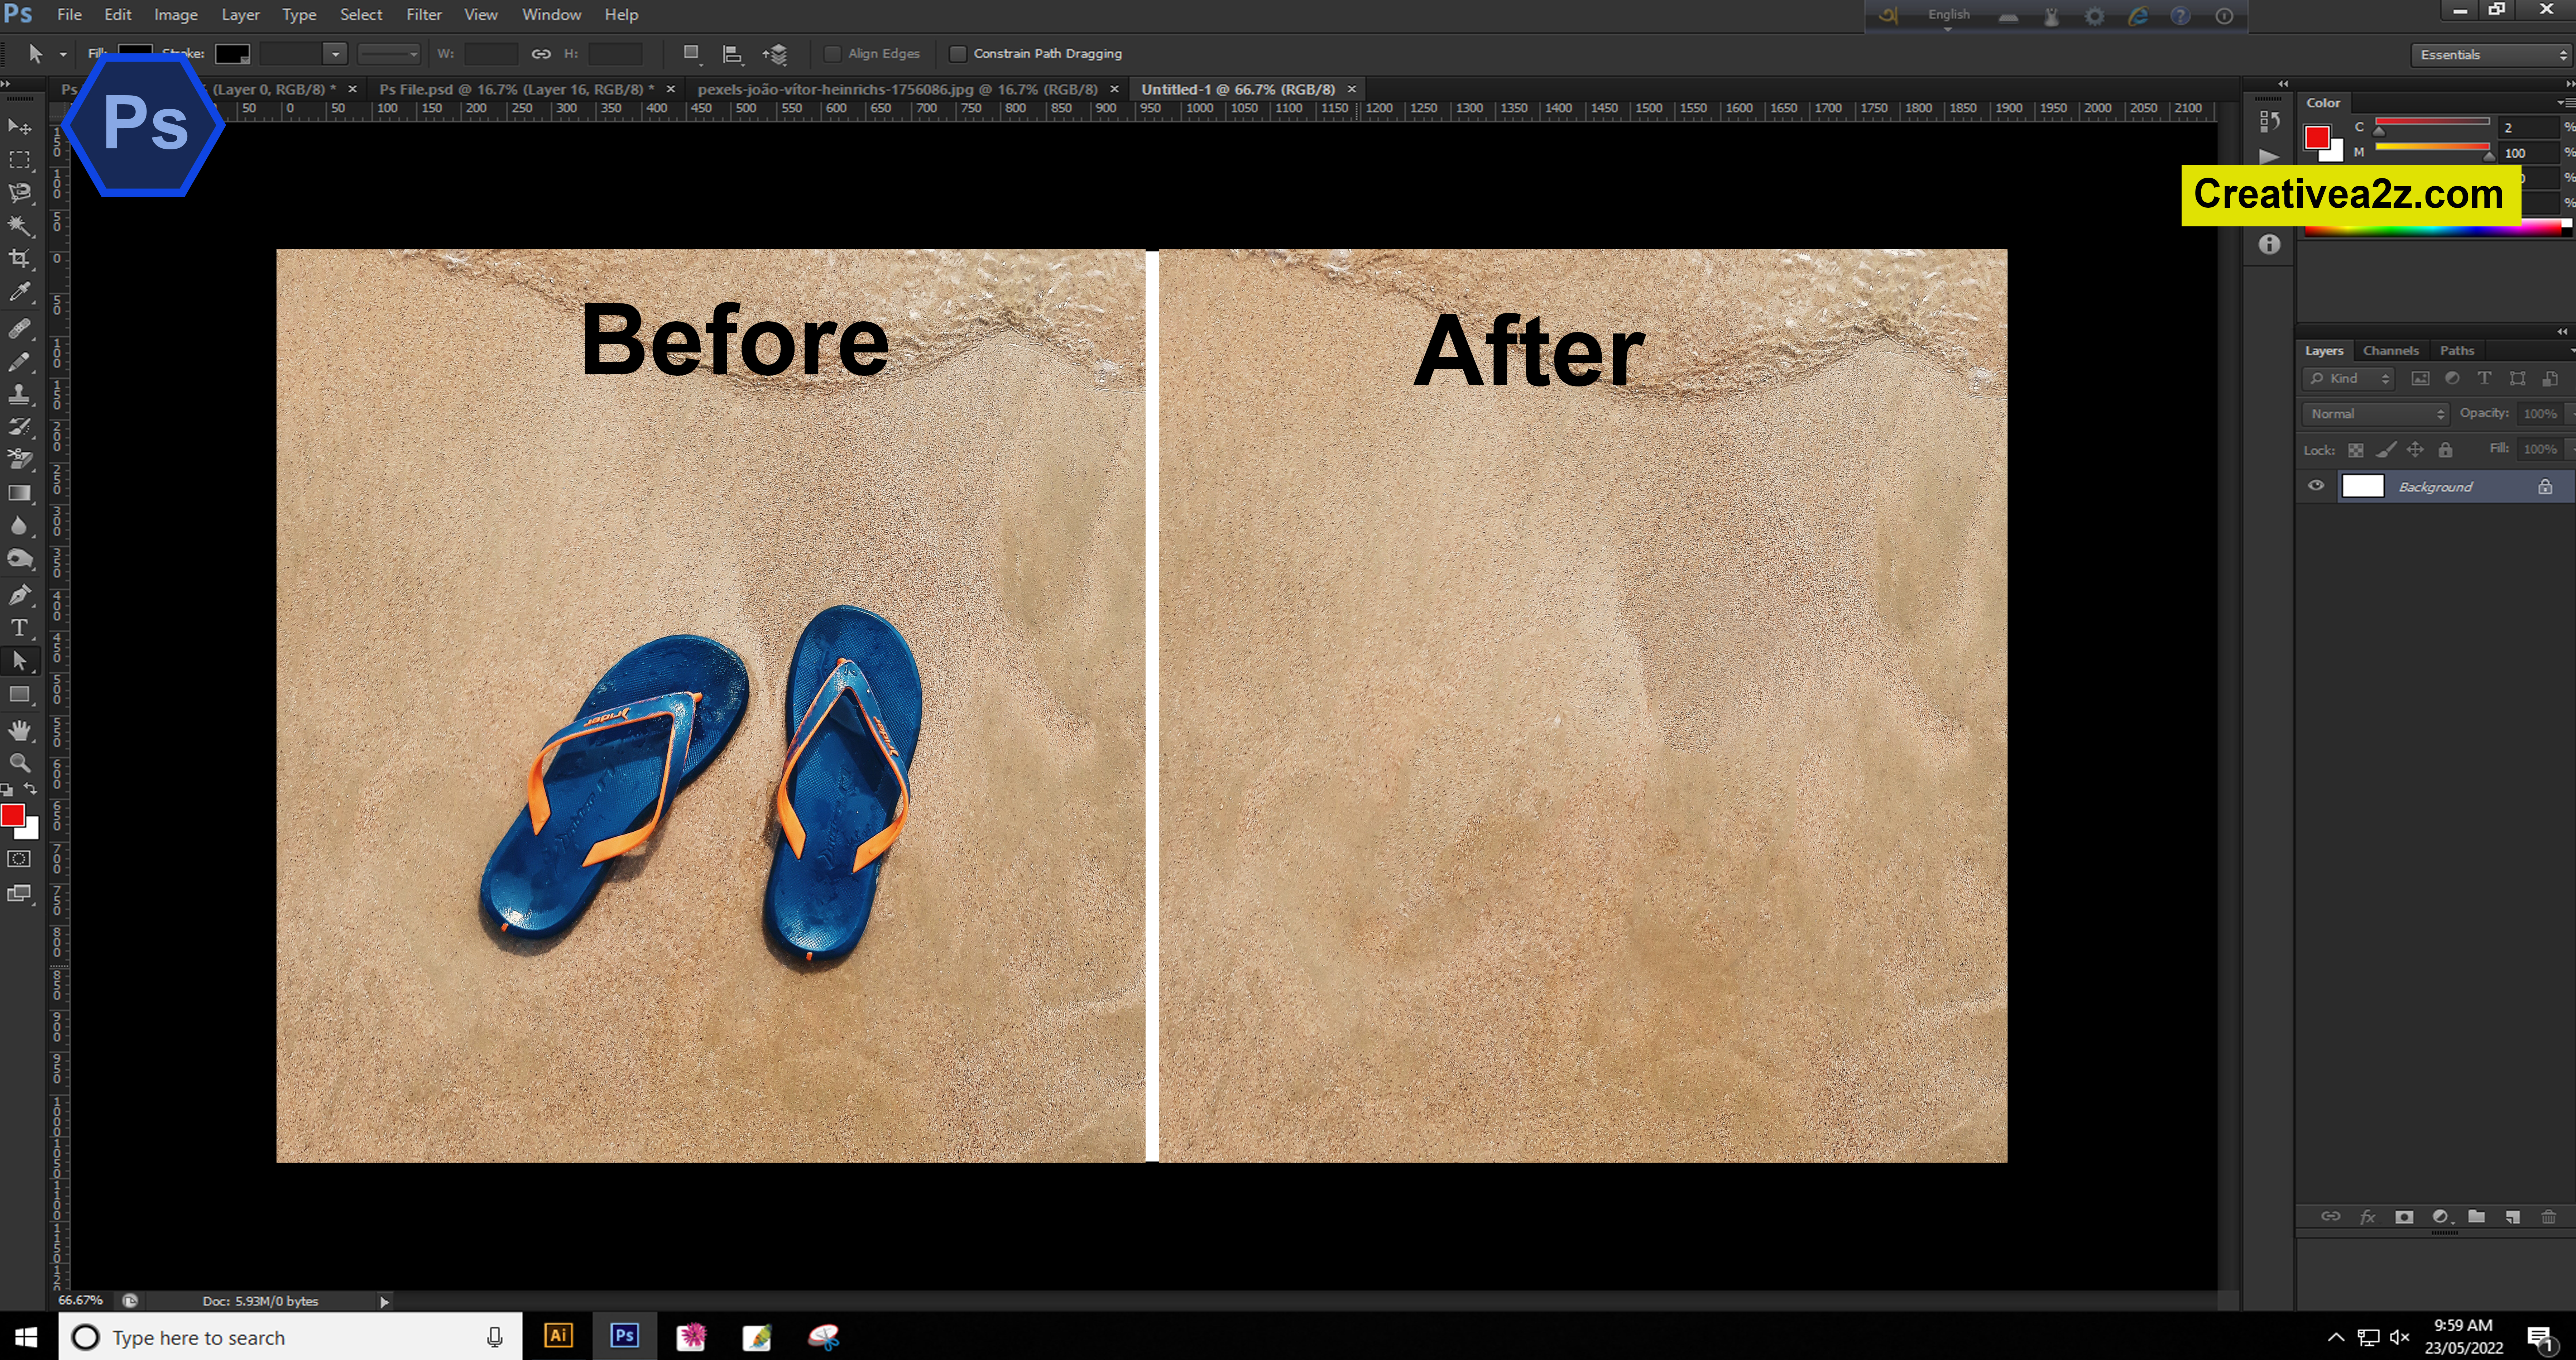 How to remove unwanted objects from your photos in Photoshop Step by step(creativea2z)